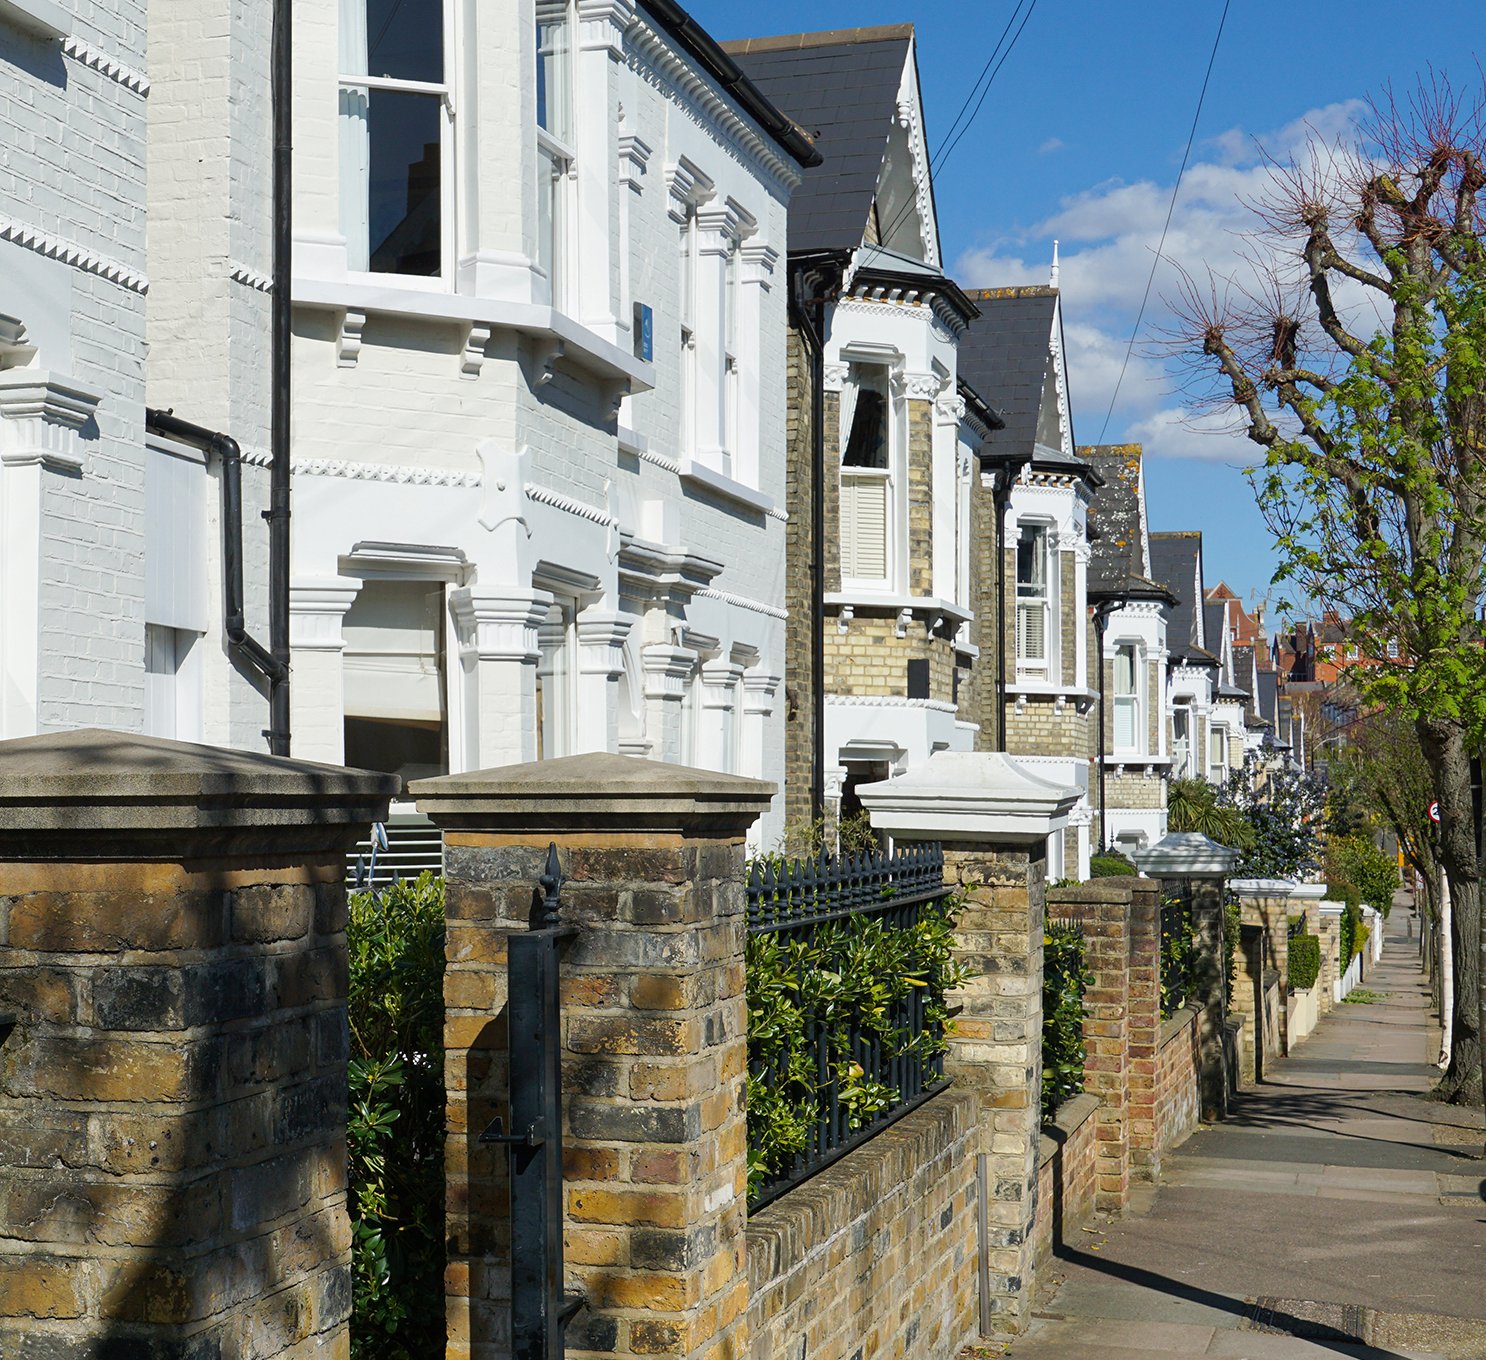 A row of white Victorian houses near Clapham Junction in South West London.